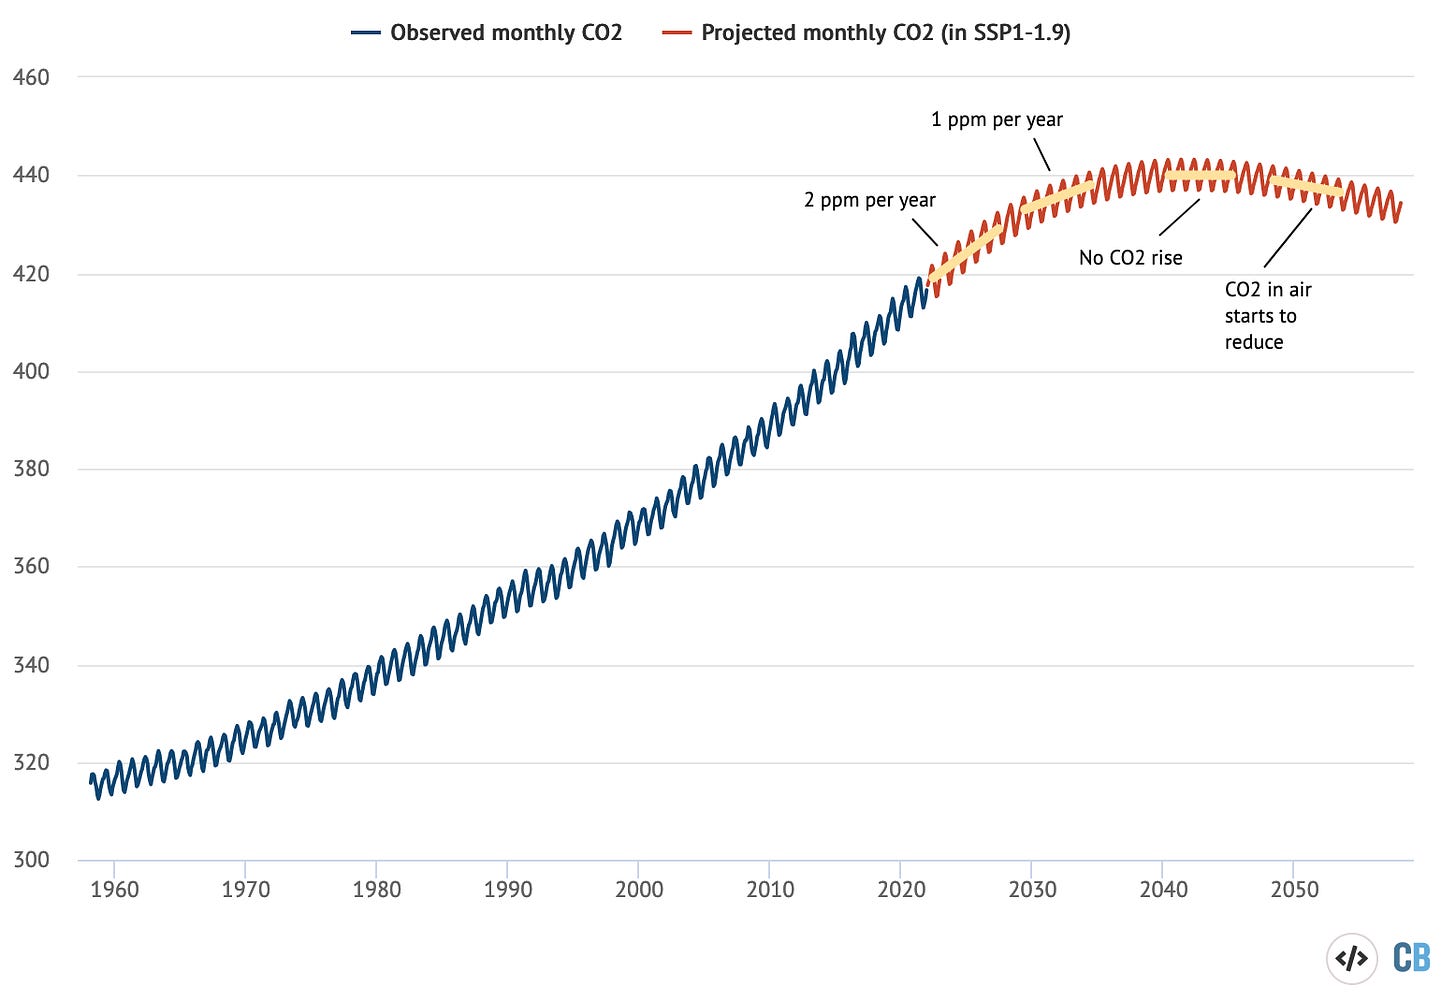 An extension of the Keeling Curve atmospheric CO2 data, showing how it would need to curve back down and eventually decrease by 2050 under a 1.5°C warming scenario